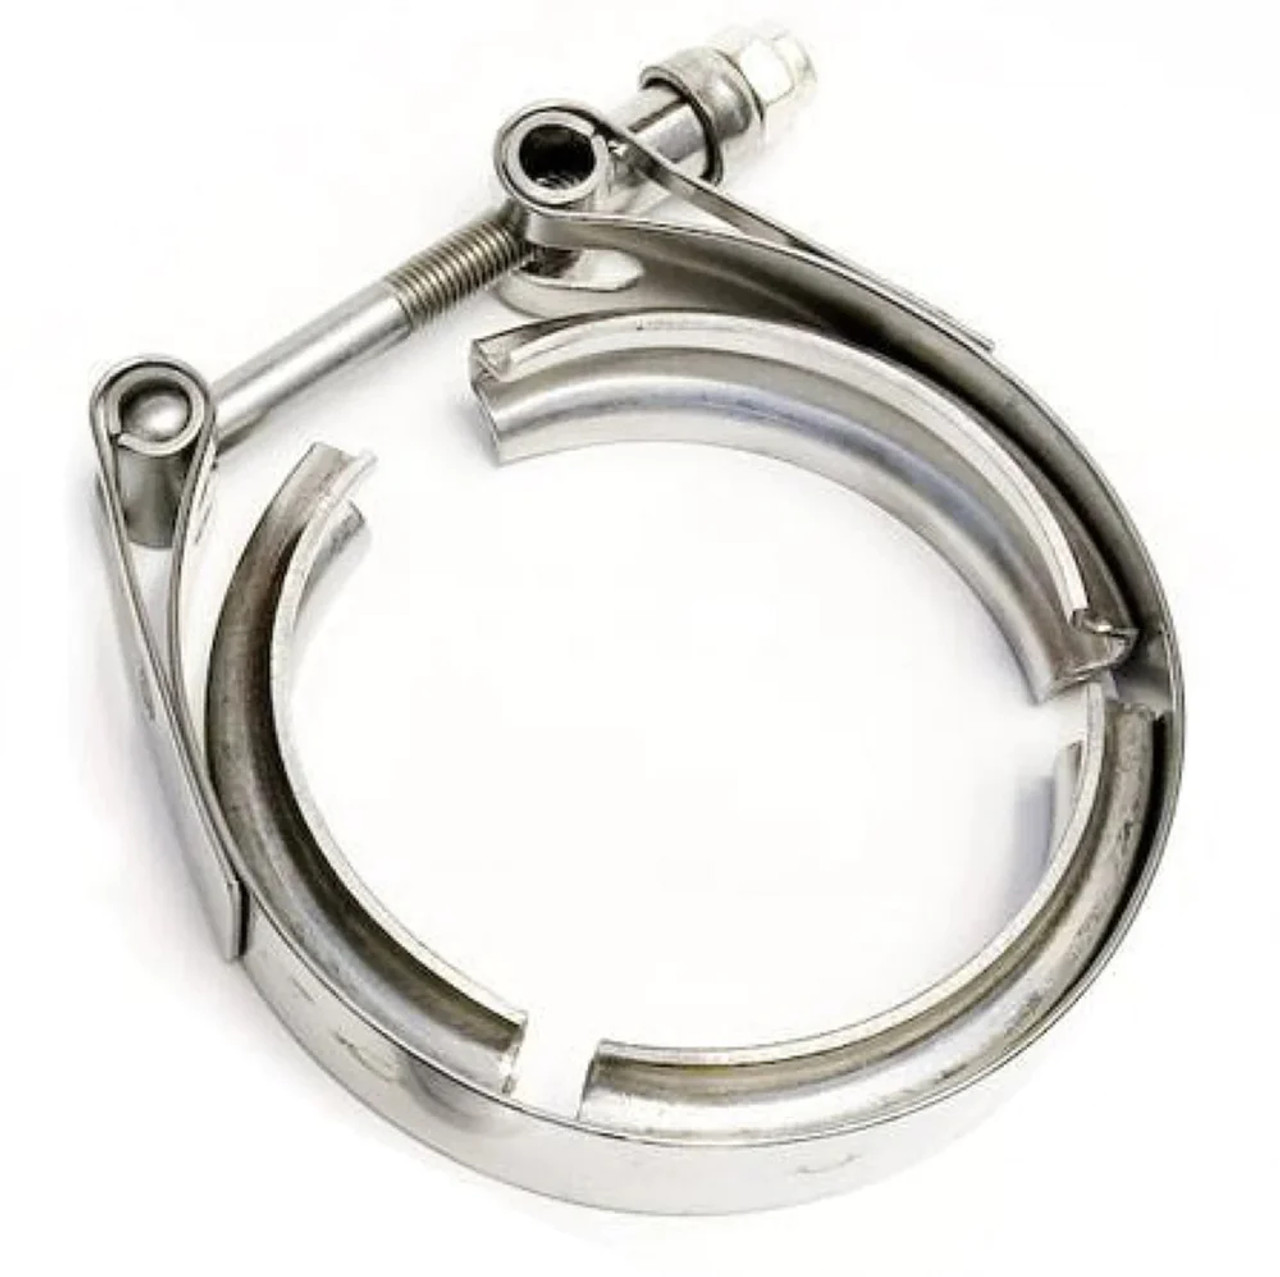 Speed Engineering 2.5" V-Band Clamp (Large 8mm x 1.25 Bolt)